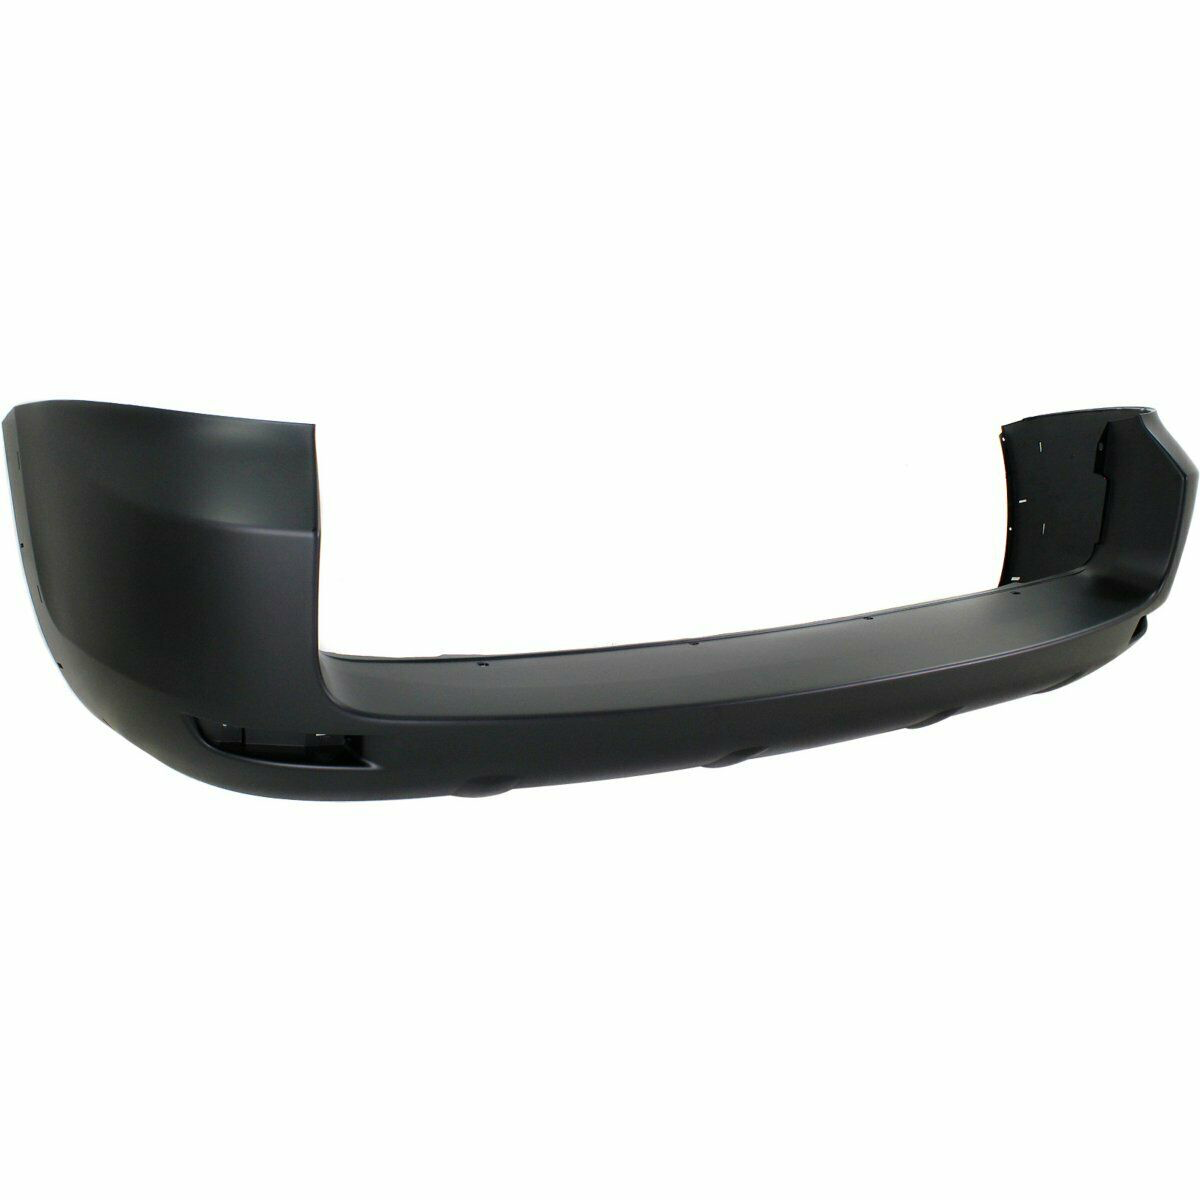 2006-2010 Toyota RAV4 Rear Bumper w/flare holes Painted to Match